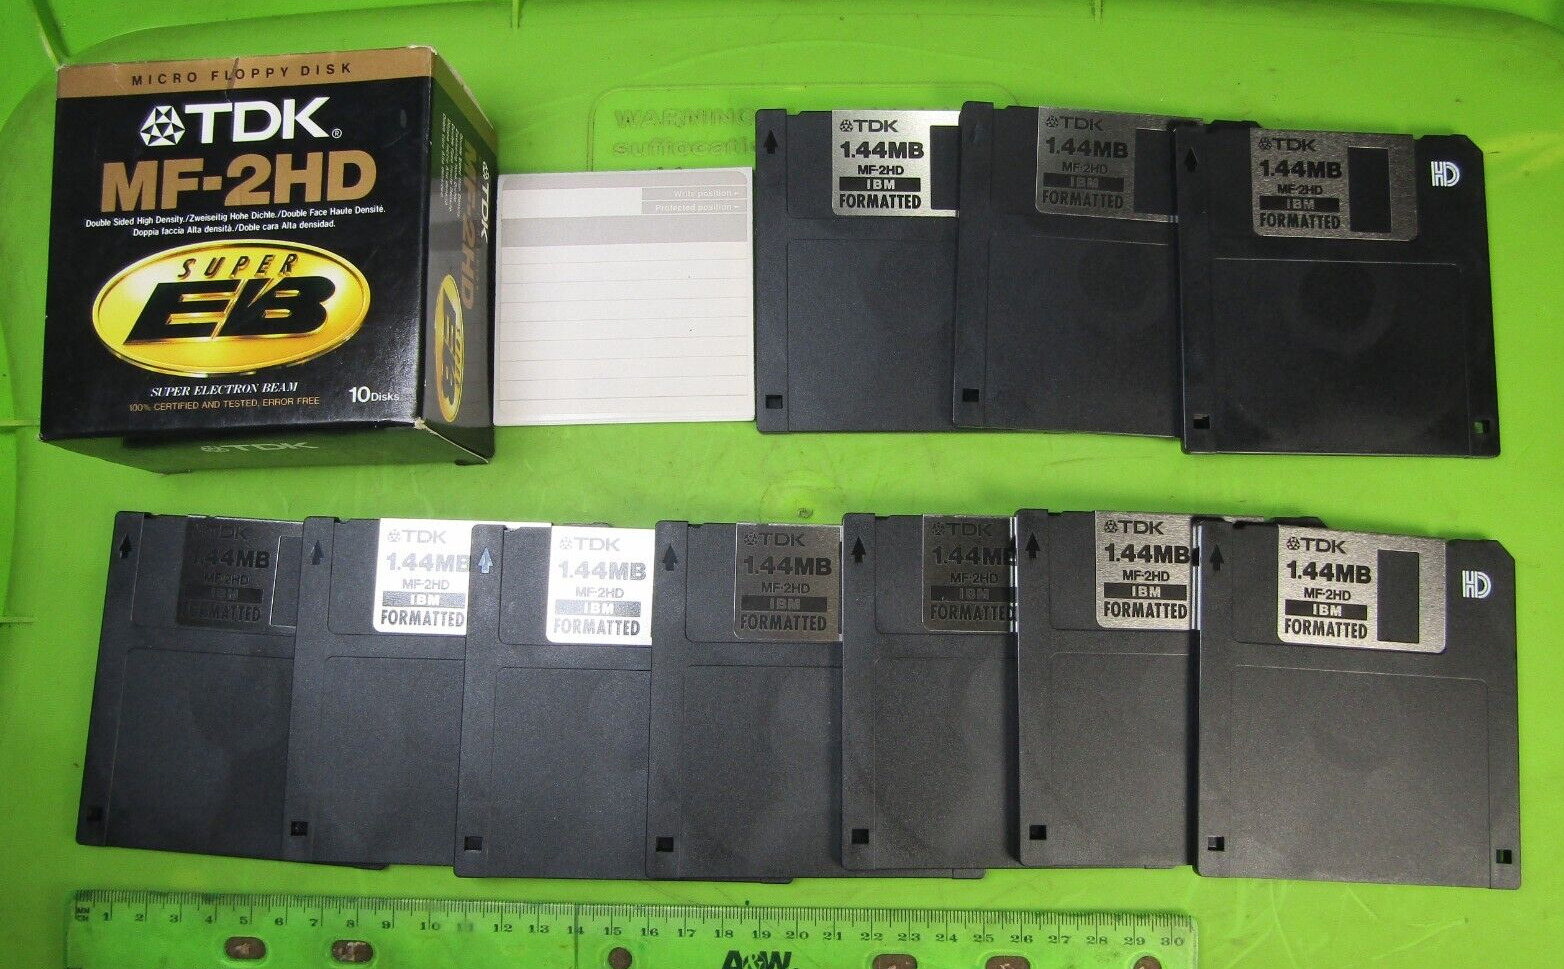 TDK MF-2HD Micro Floppy Disks Storage Double Sided Super EB 1 box of 10 NOS